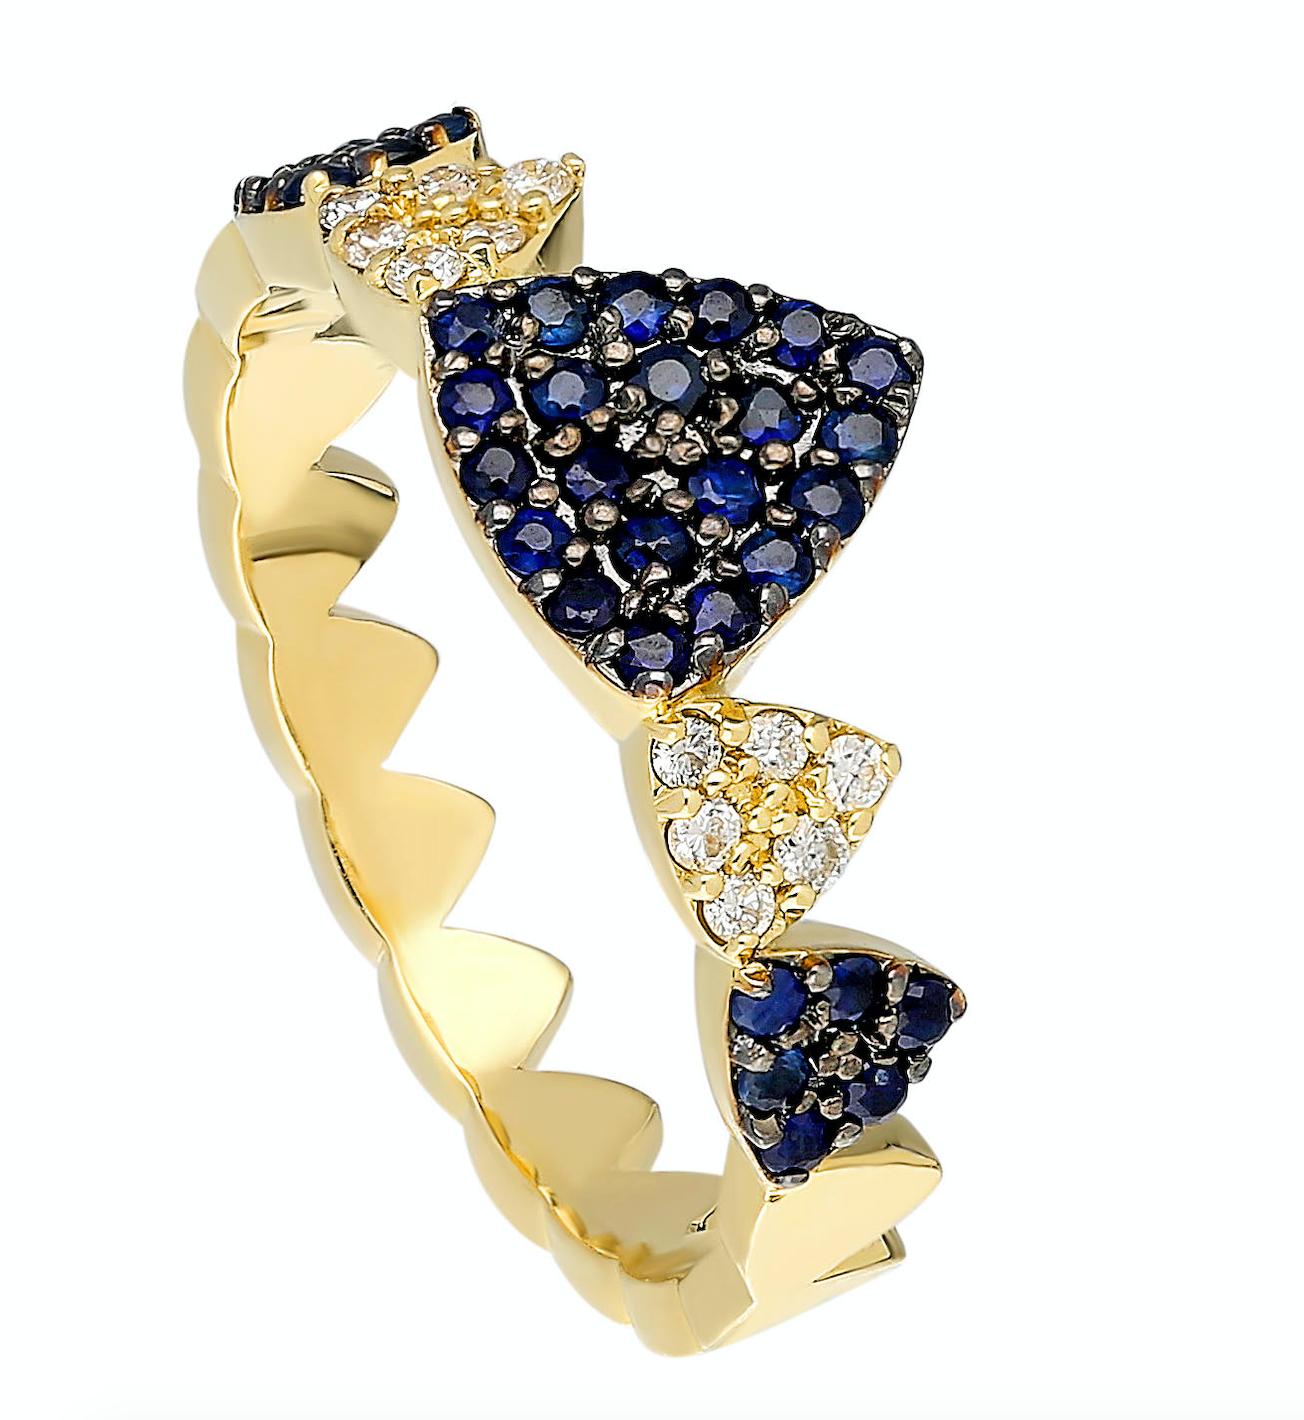 14K Yellow gold ring White diamond: .12CT  Blue sapphire: .38CT  Size: 6.5  Made in Turkey